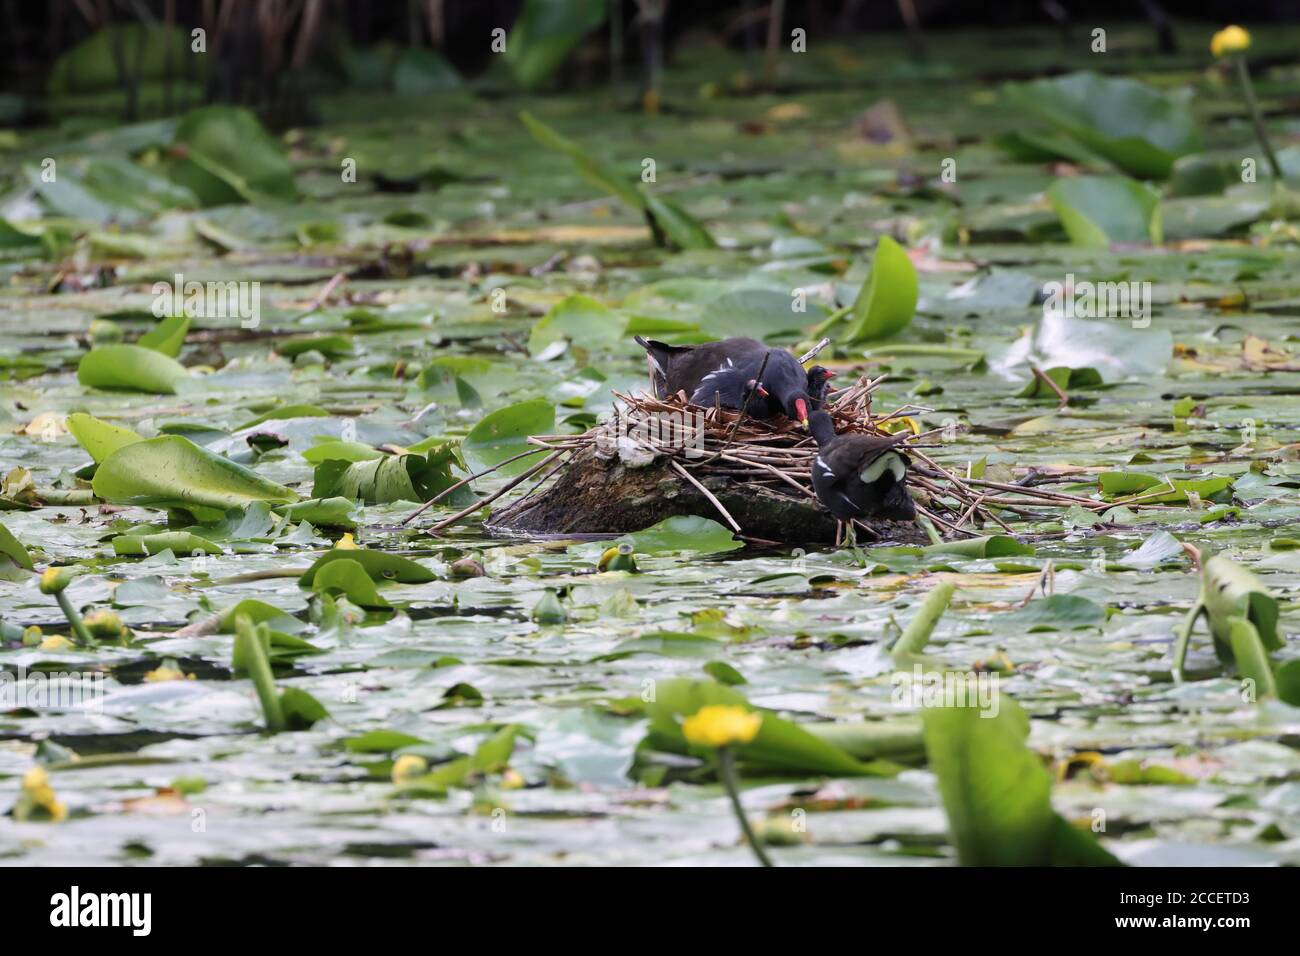 Male and Female moorhens feeding their chicks on a pond with lily pads. County Durham, England, UK. Stock Photo